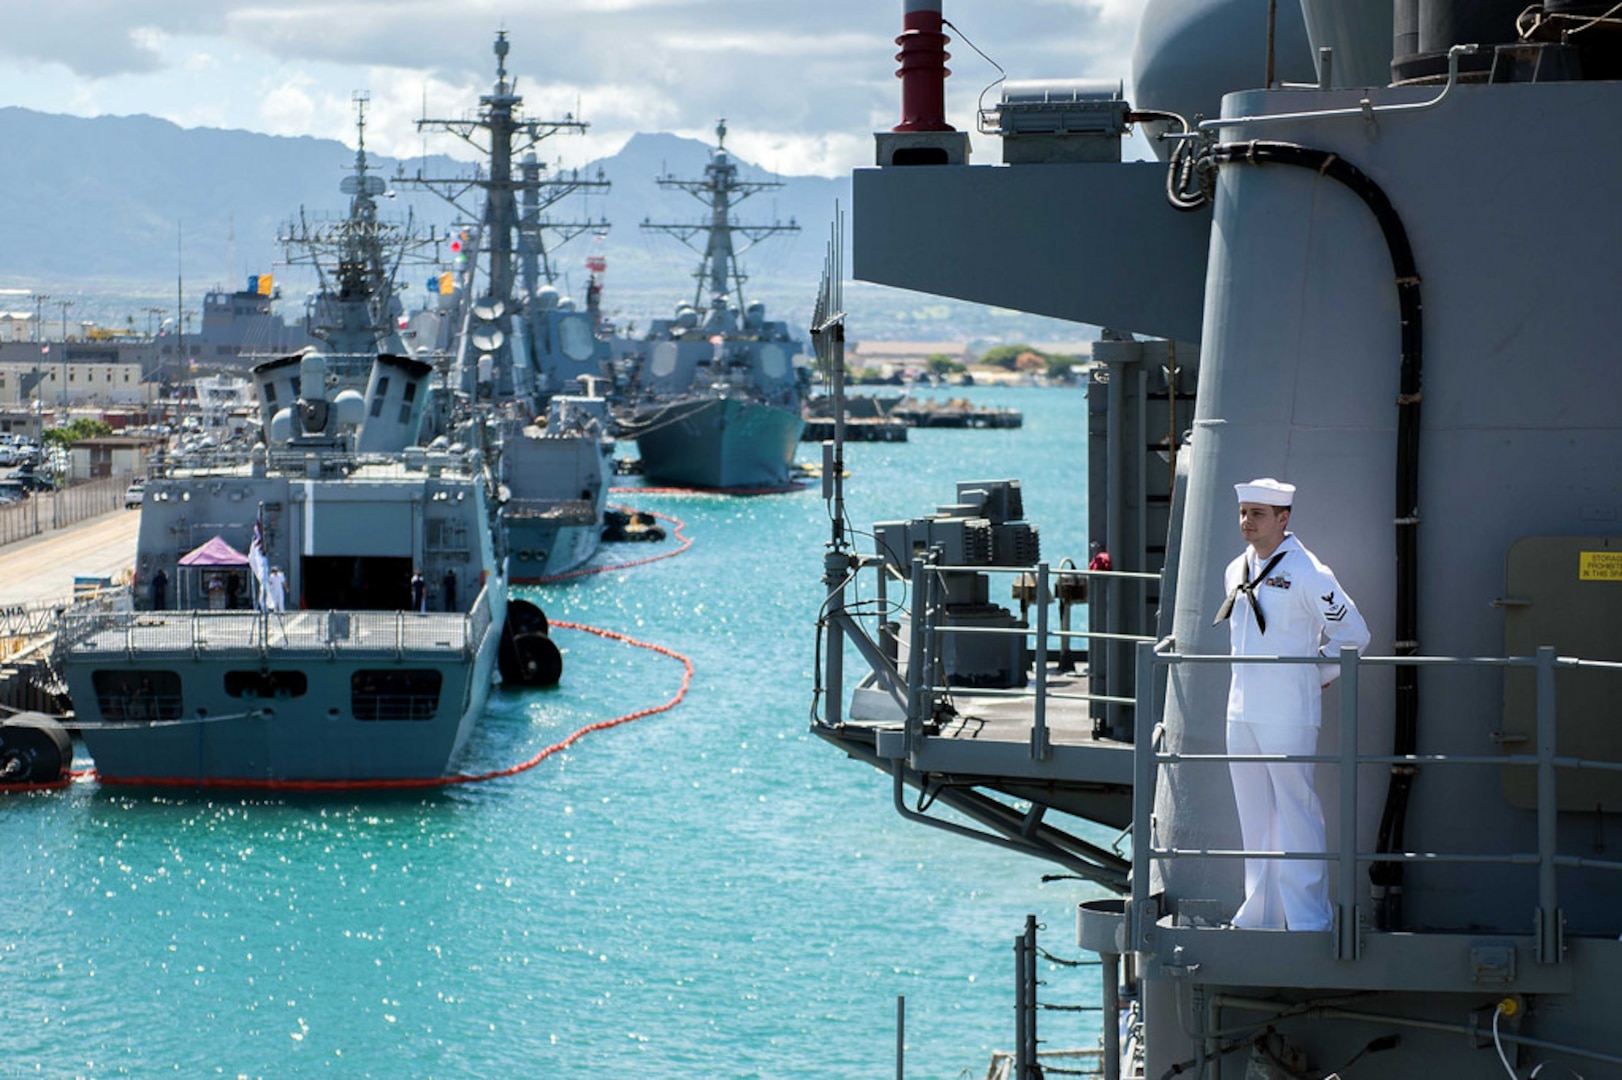 PEARL HARBOR, Hawaii  (June 28, 2016) - Fire Controlman 2nd Class Michael Klimek mans the rails aboard the guided-missile cruiser USS Mobile Bay (CG 53) as the ship prepares to moor at Joint Joint Base Pearl Harbor-Hickam to participate in exercise Rim of the Pacific 2016. Twenty-six nations, more than 40 ships and submarines, more than 200 aircraft and 25,000 personnel are participating in RIMPAC from June 30 to Aug. 4, in and around the Hawaiian Islands and Southern California. The world's largest international maritime exercise, RIMPAC provides a unique training opportunity that helps participants foster and sustain the cooperative relationships that are critical to ensuring the safety of sea lanes and security on the world's oceans. RIMPAC 2016 is the 25th exercise in the series that began in 1971. 